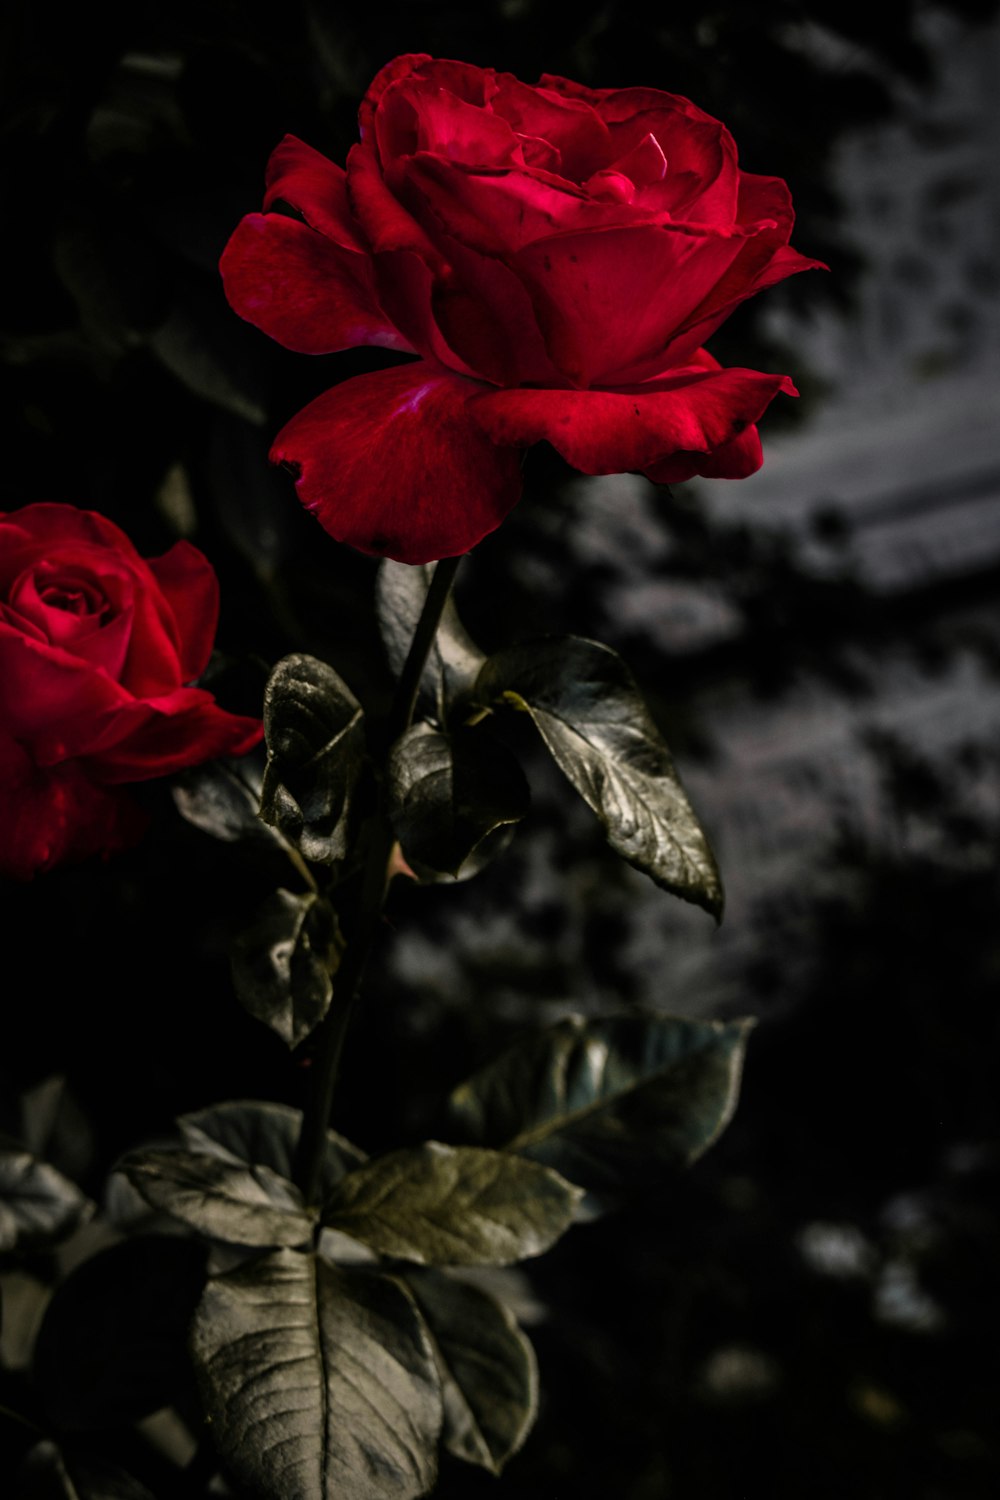 red rose close-up photography